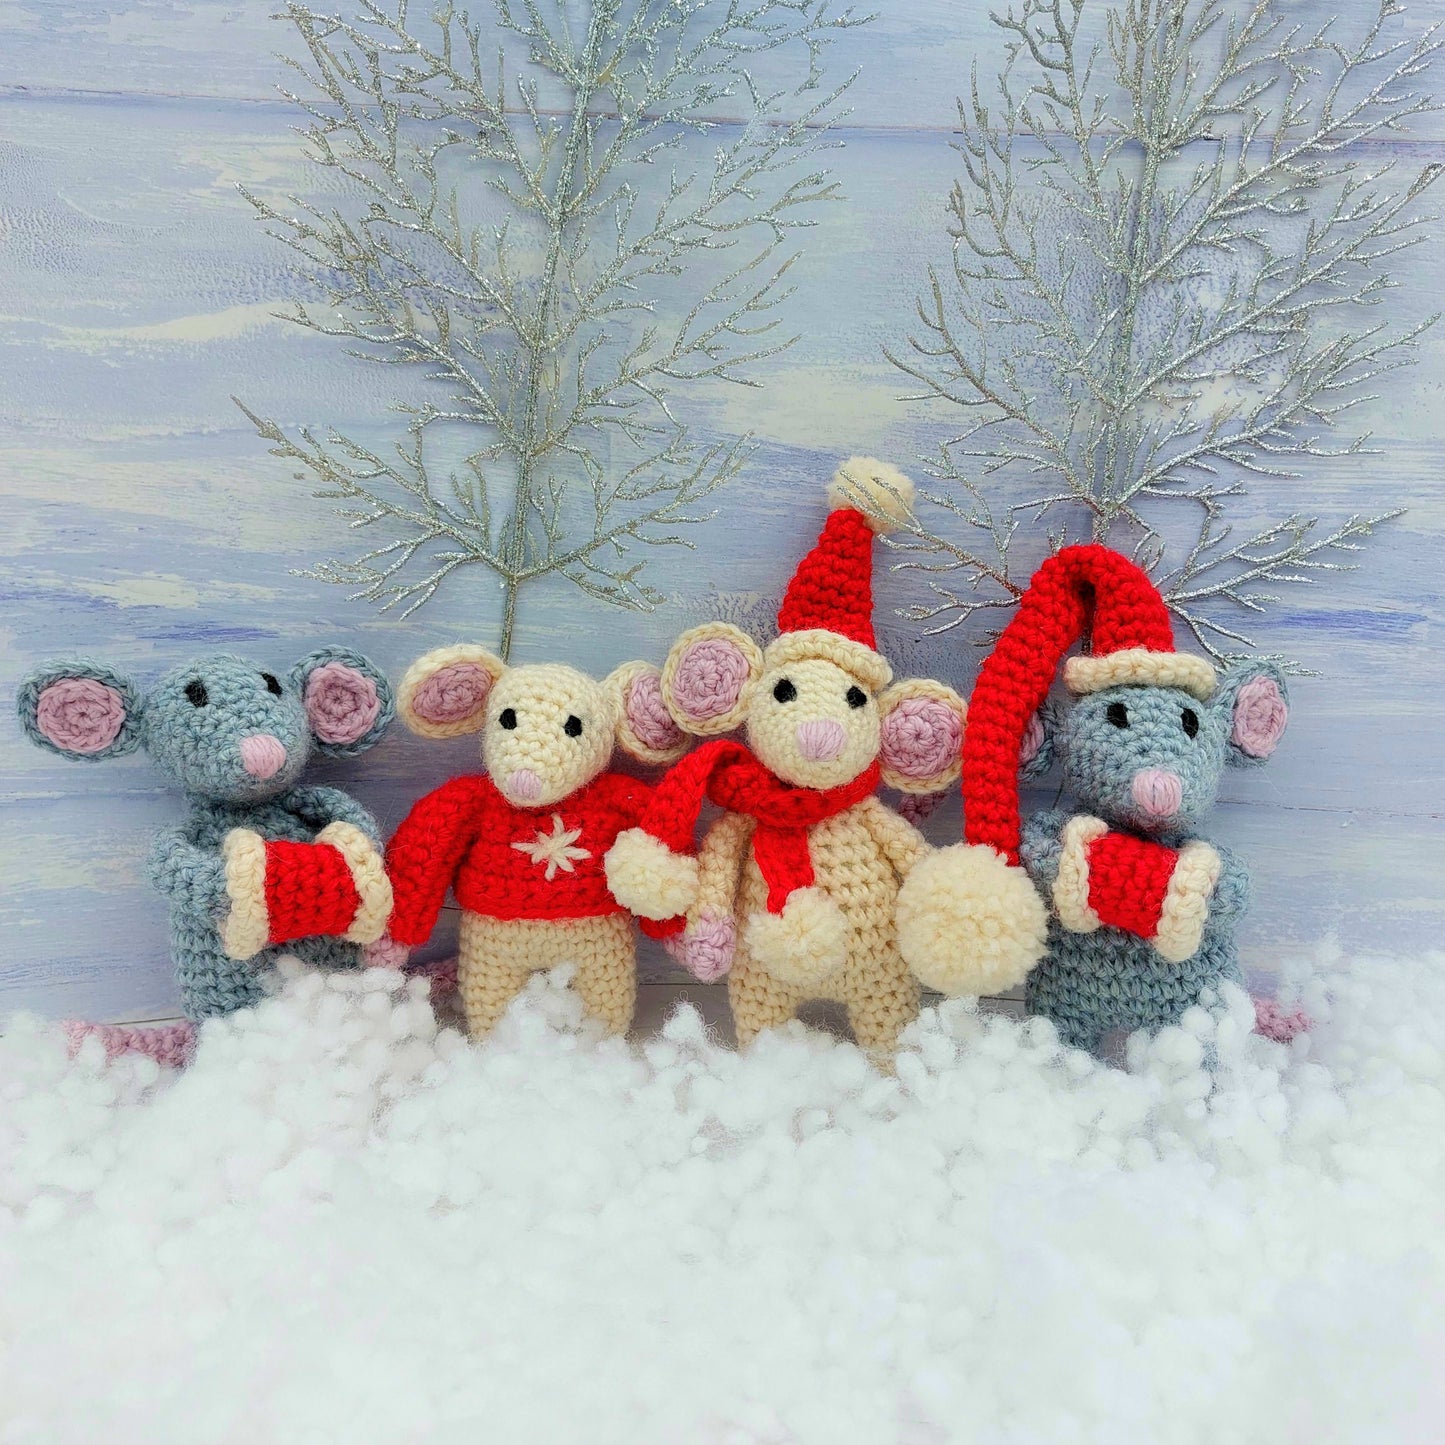 Crochet Mice playing with snowballs